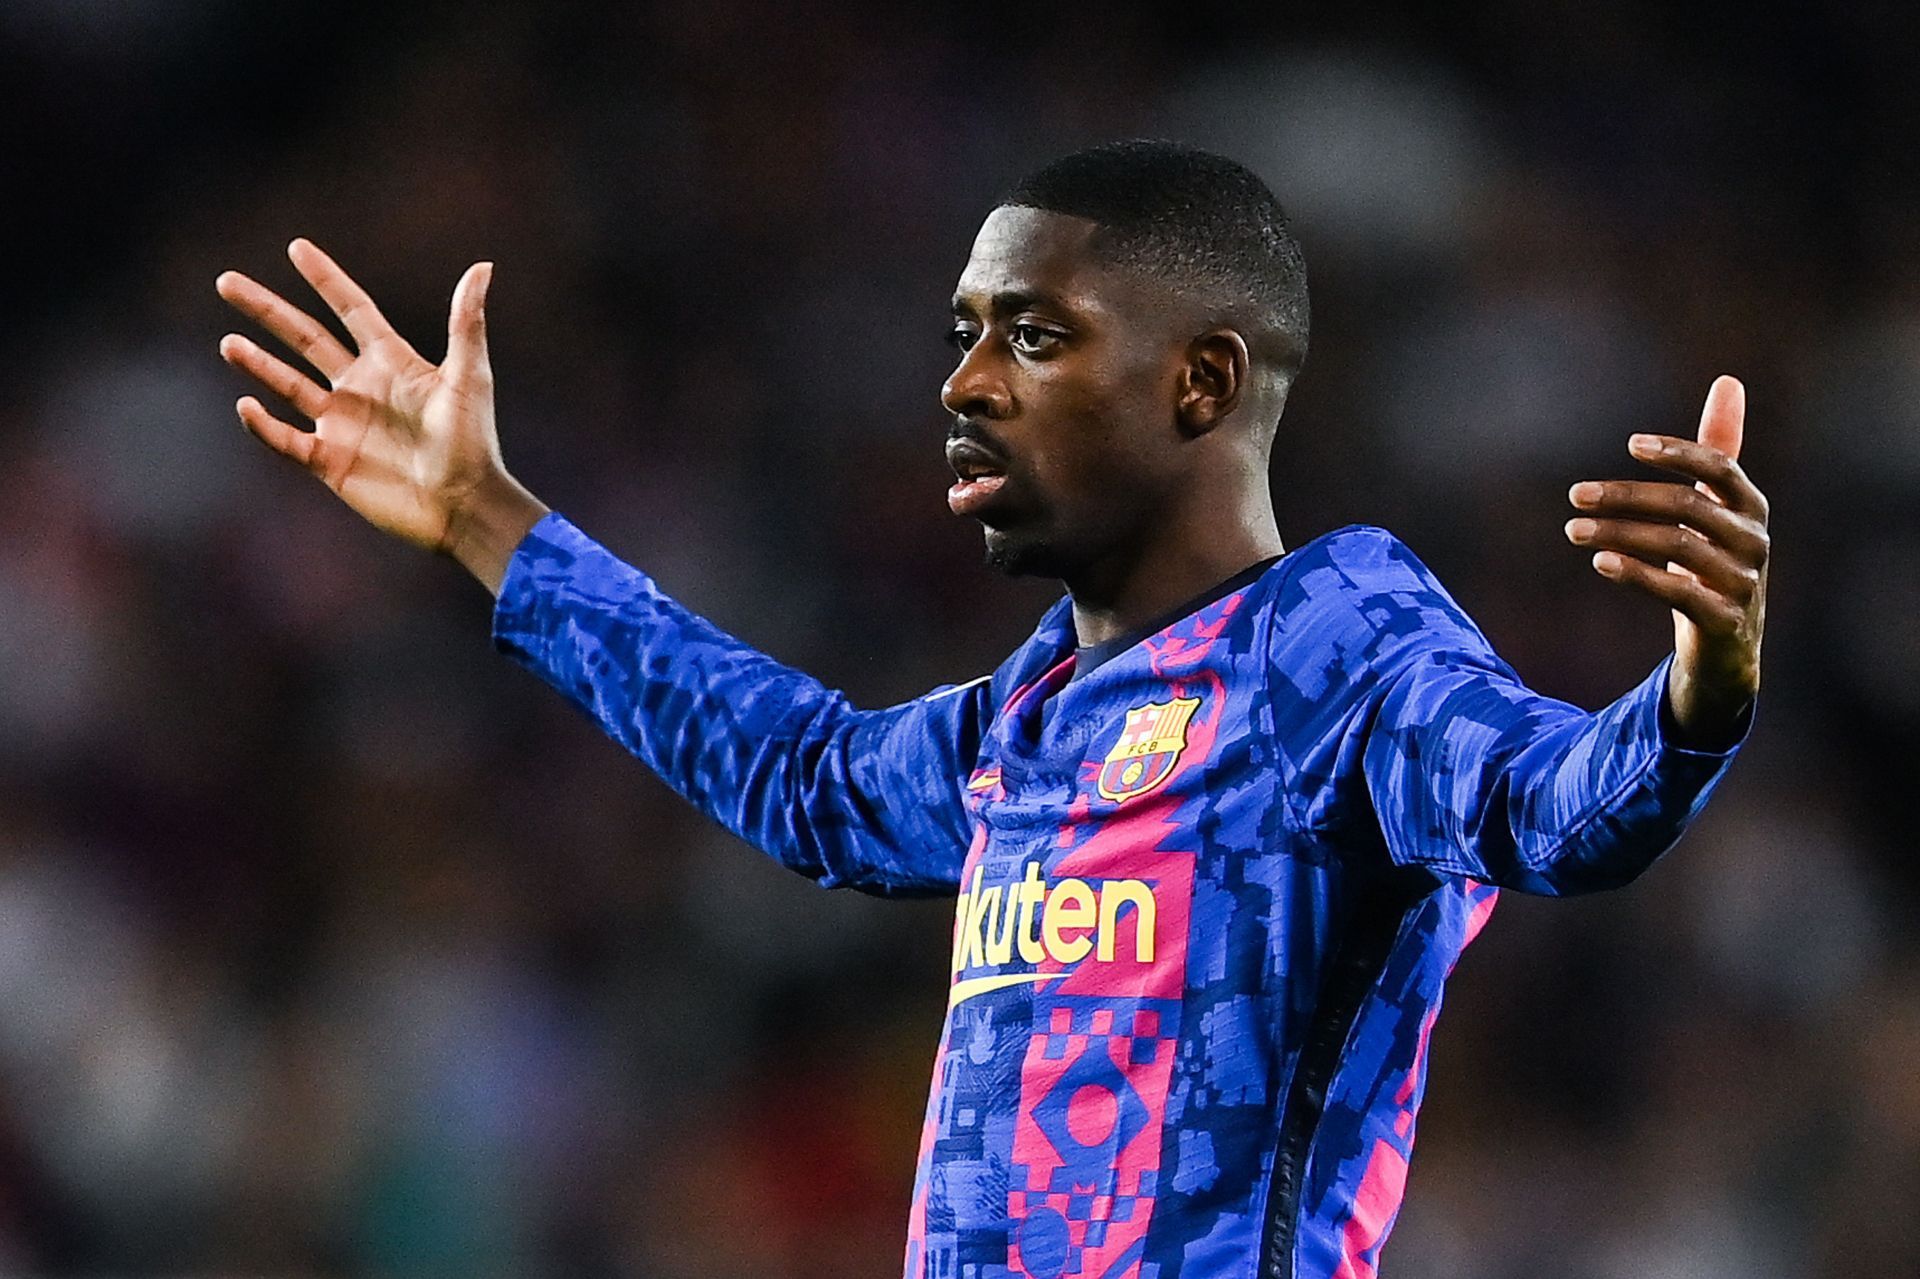 Dembele has 13 league assists for Barcelona this season